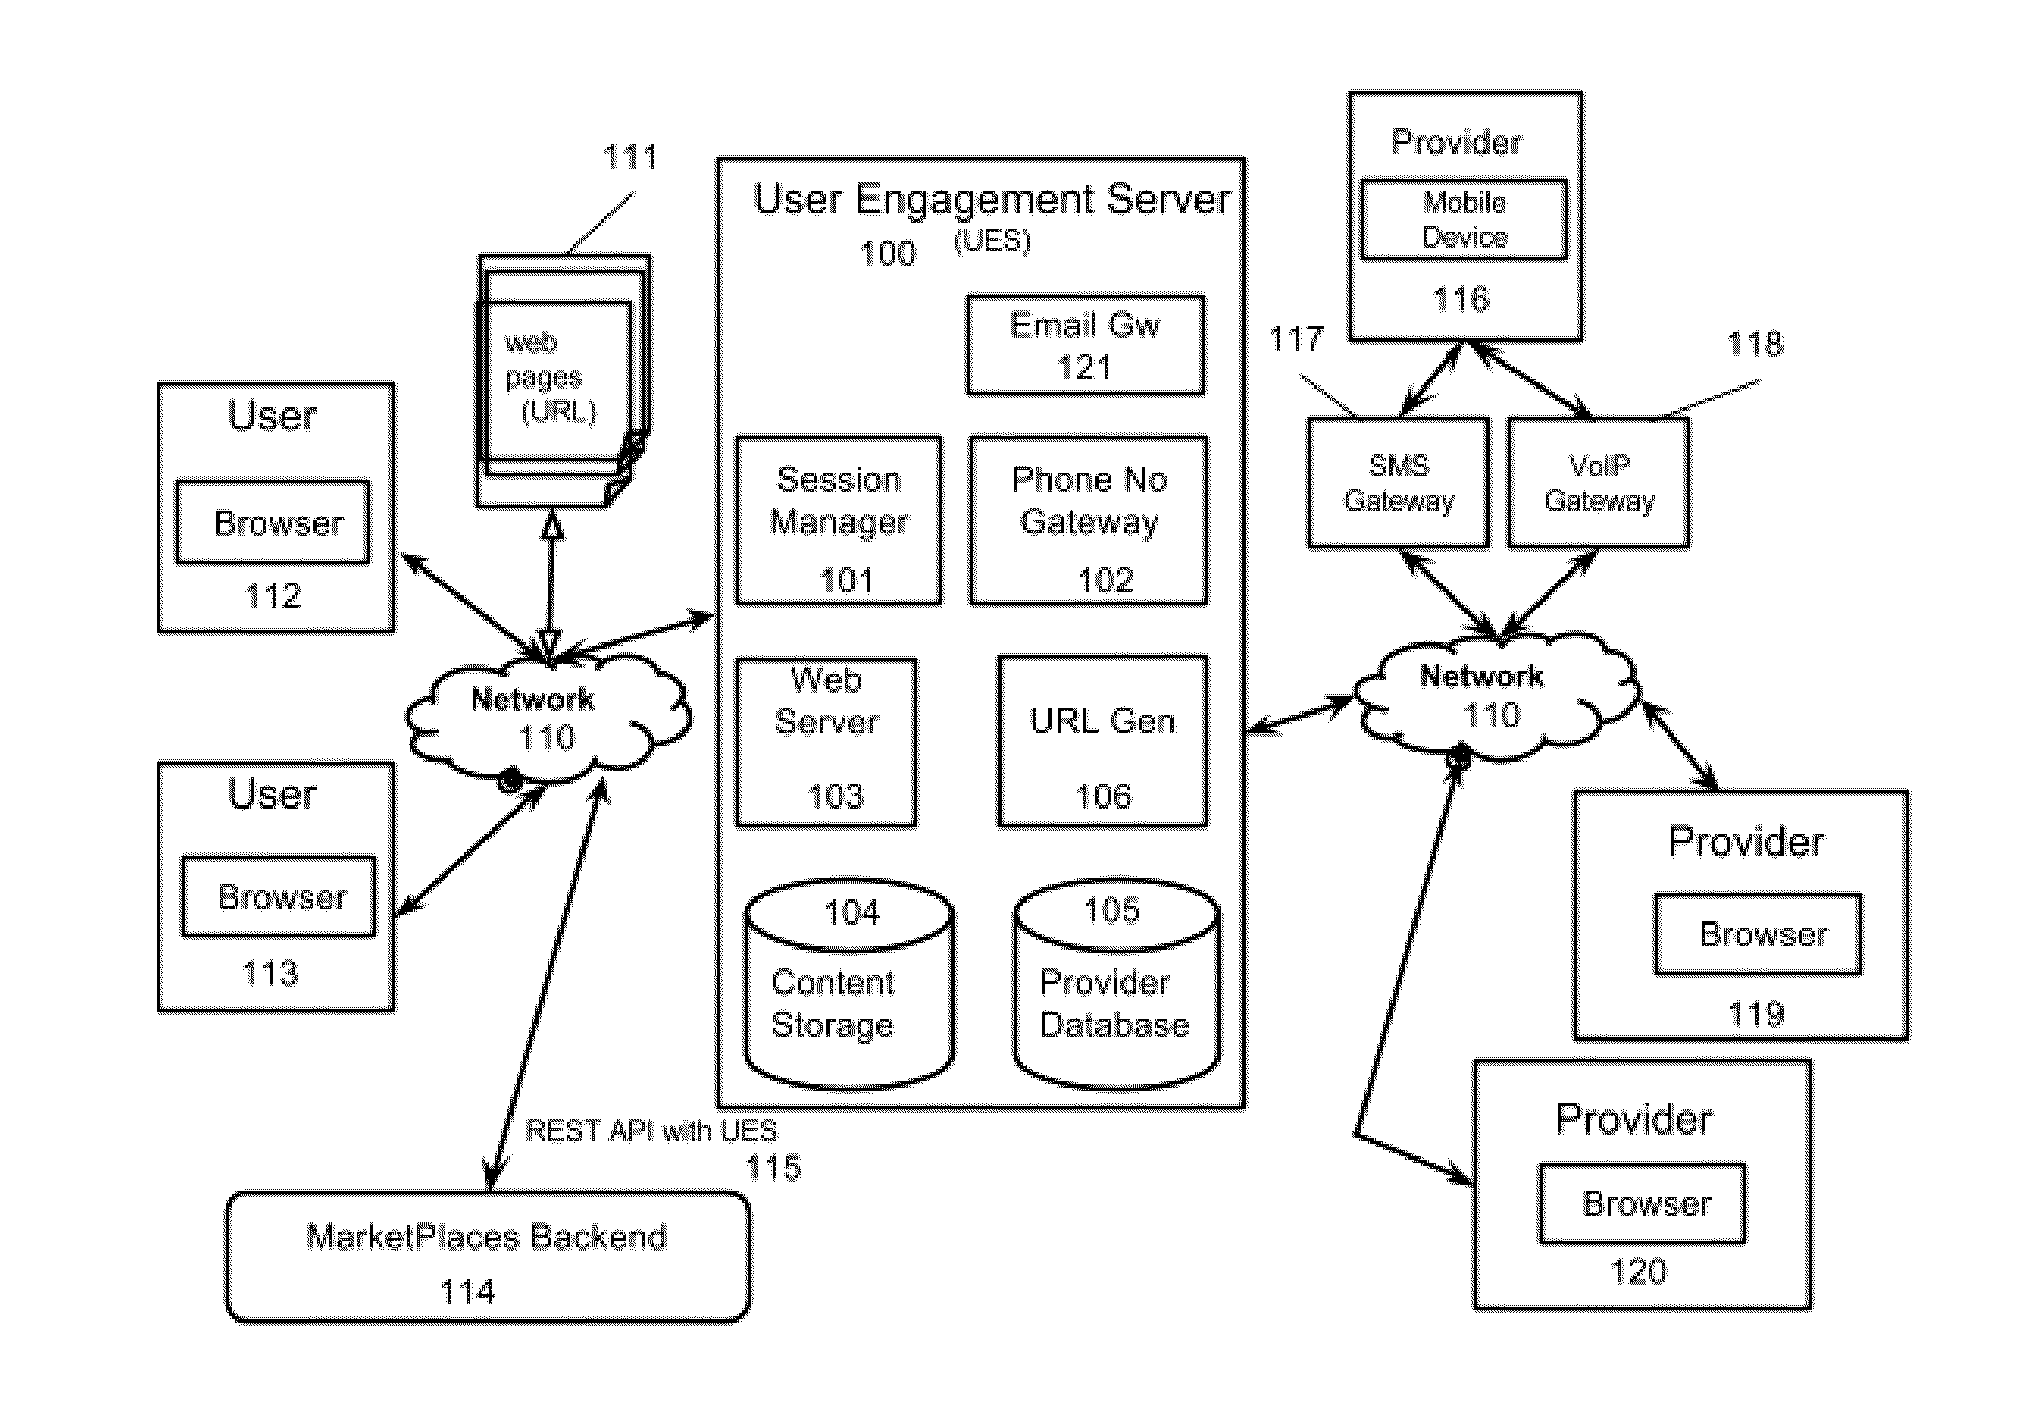 Instant generation and usage of HTTP URL based unique identity for engaging in multi-modal real-time interactions in online marketplaces, social networks and other relevant places